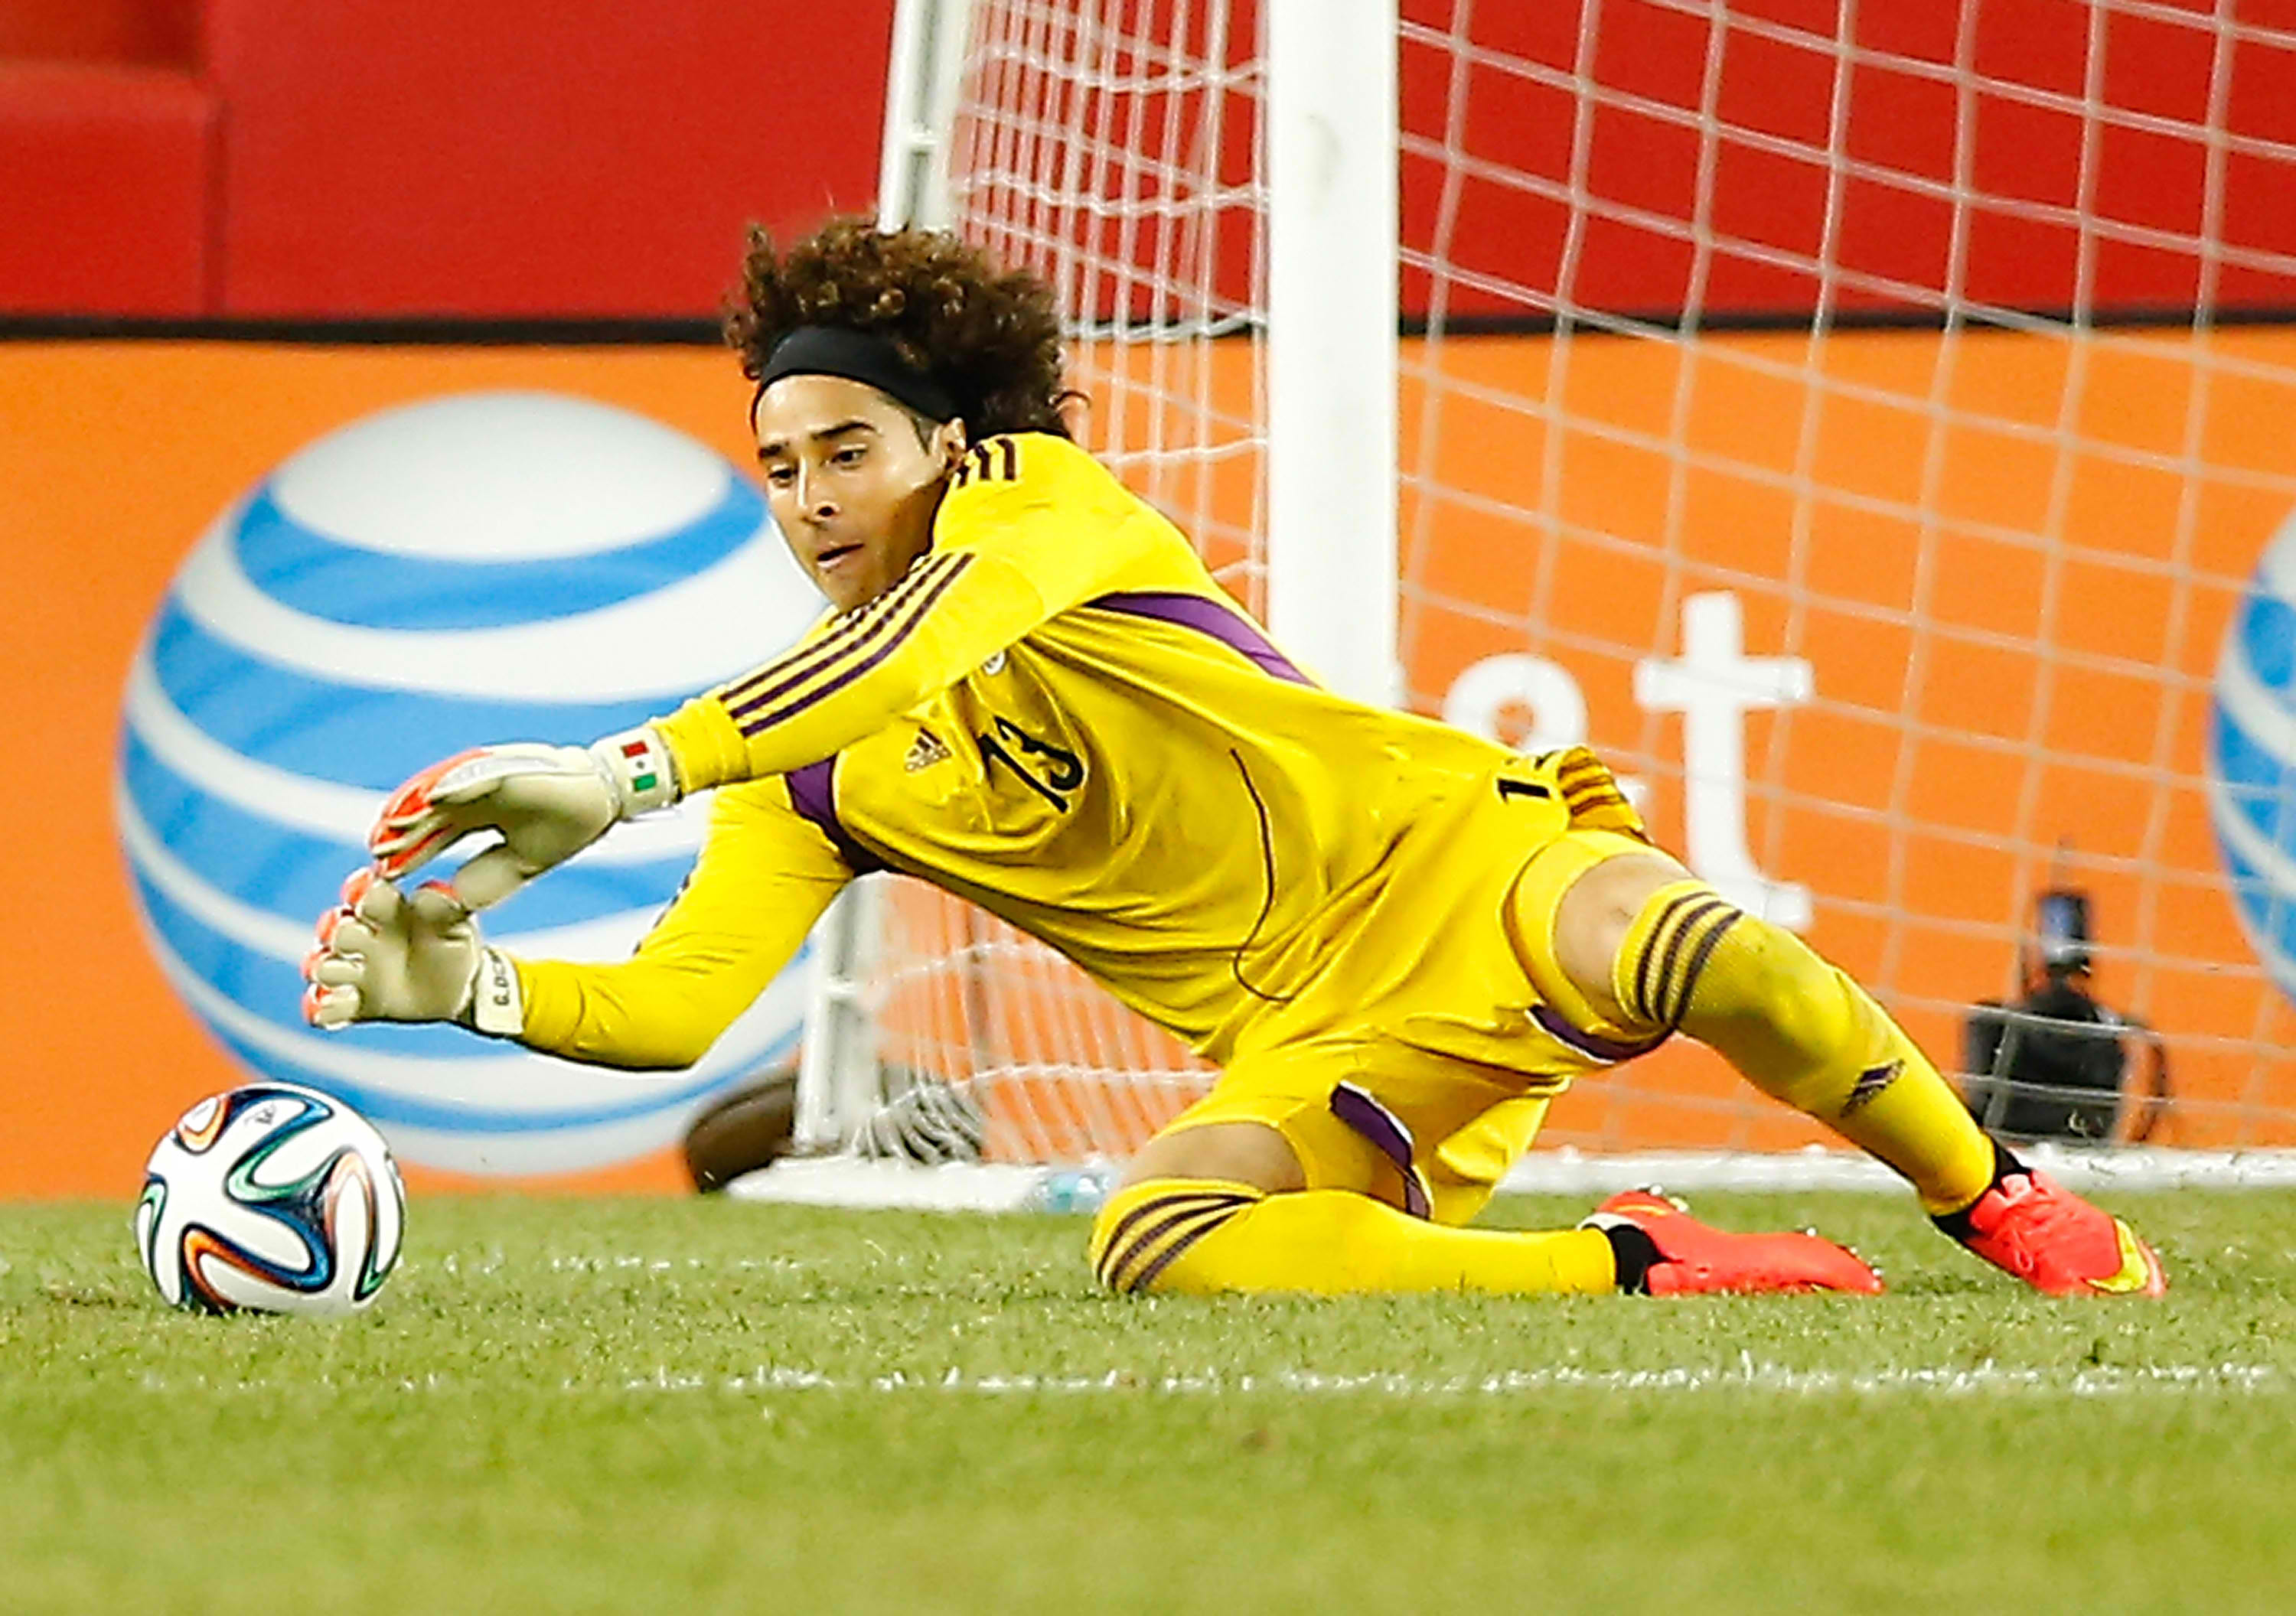 World Cup 2014 News and Rosters: Goalkeeper Guillermo Ochoa to Start